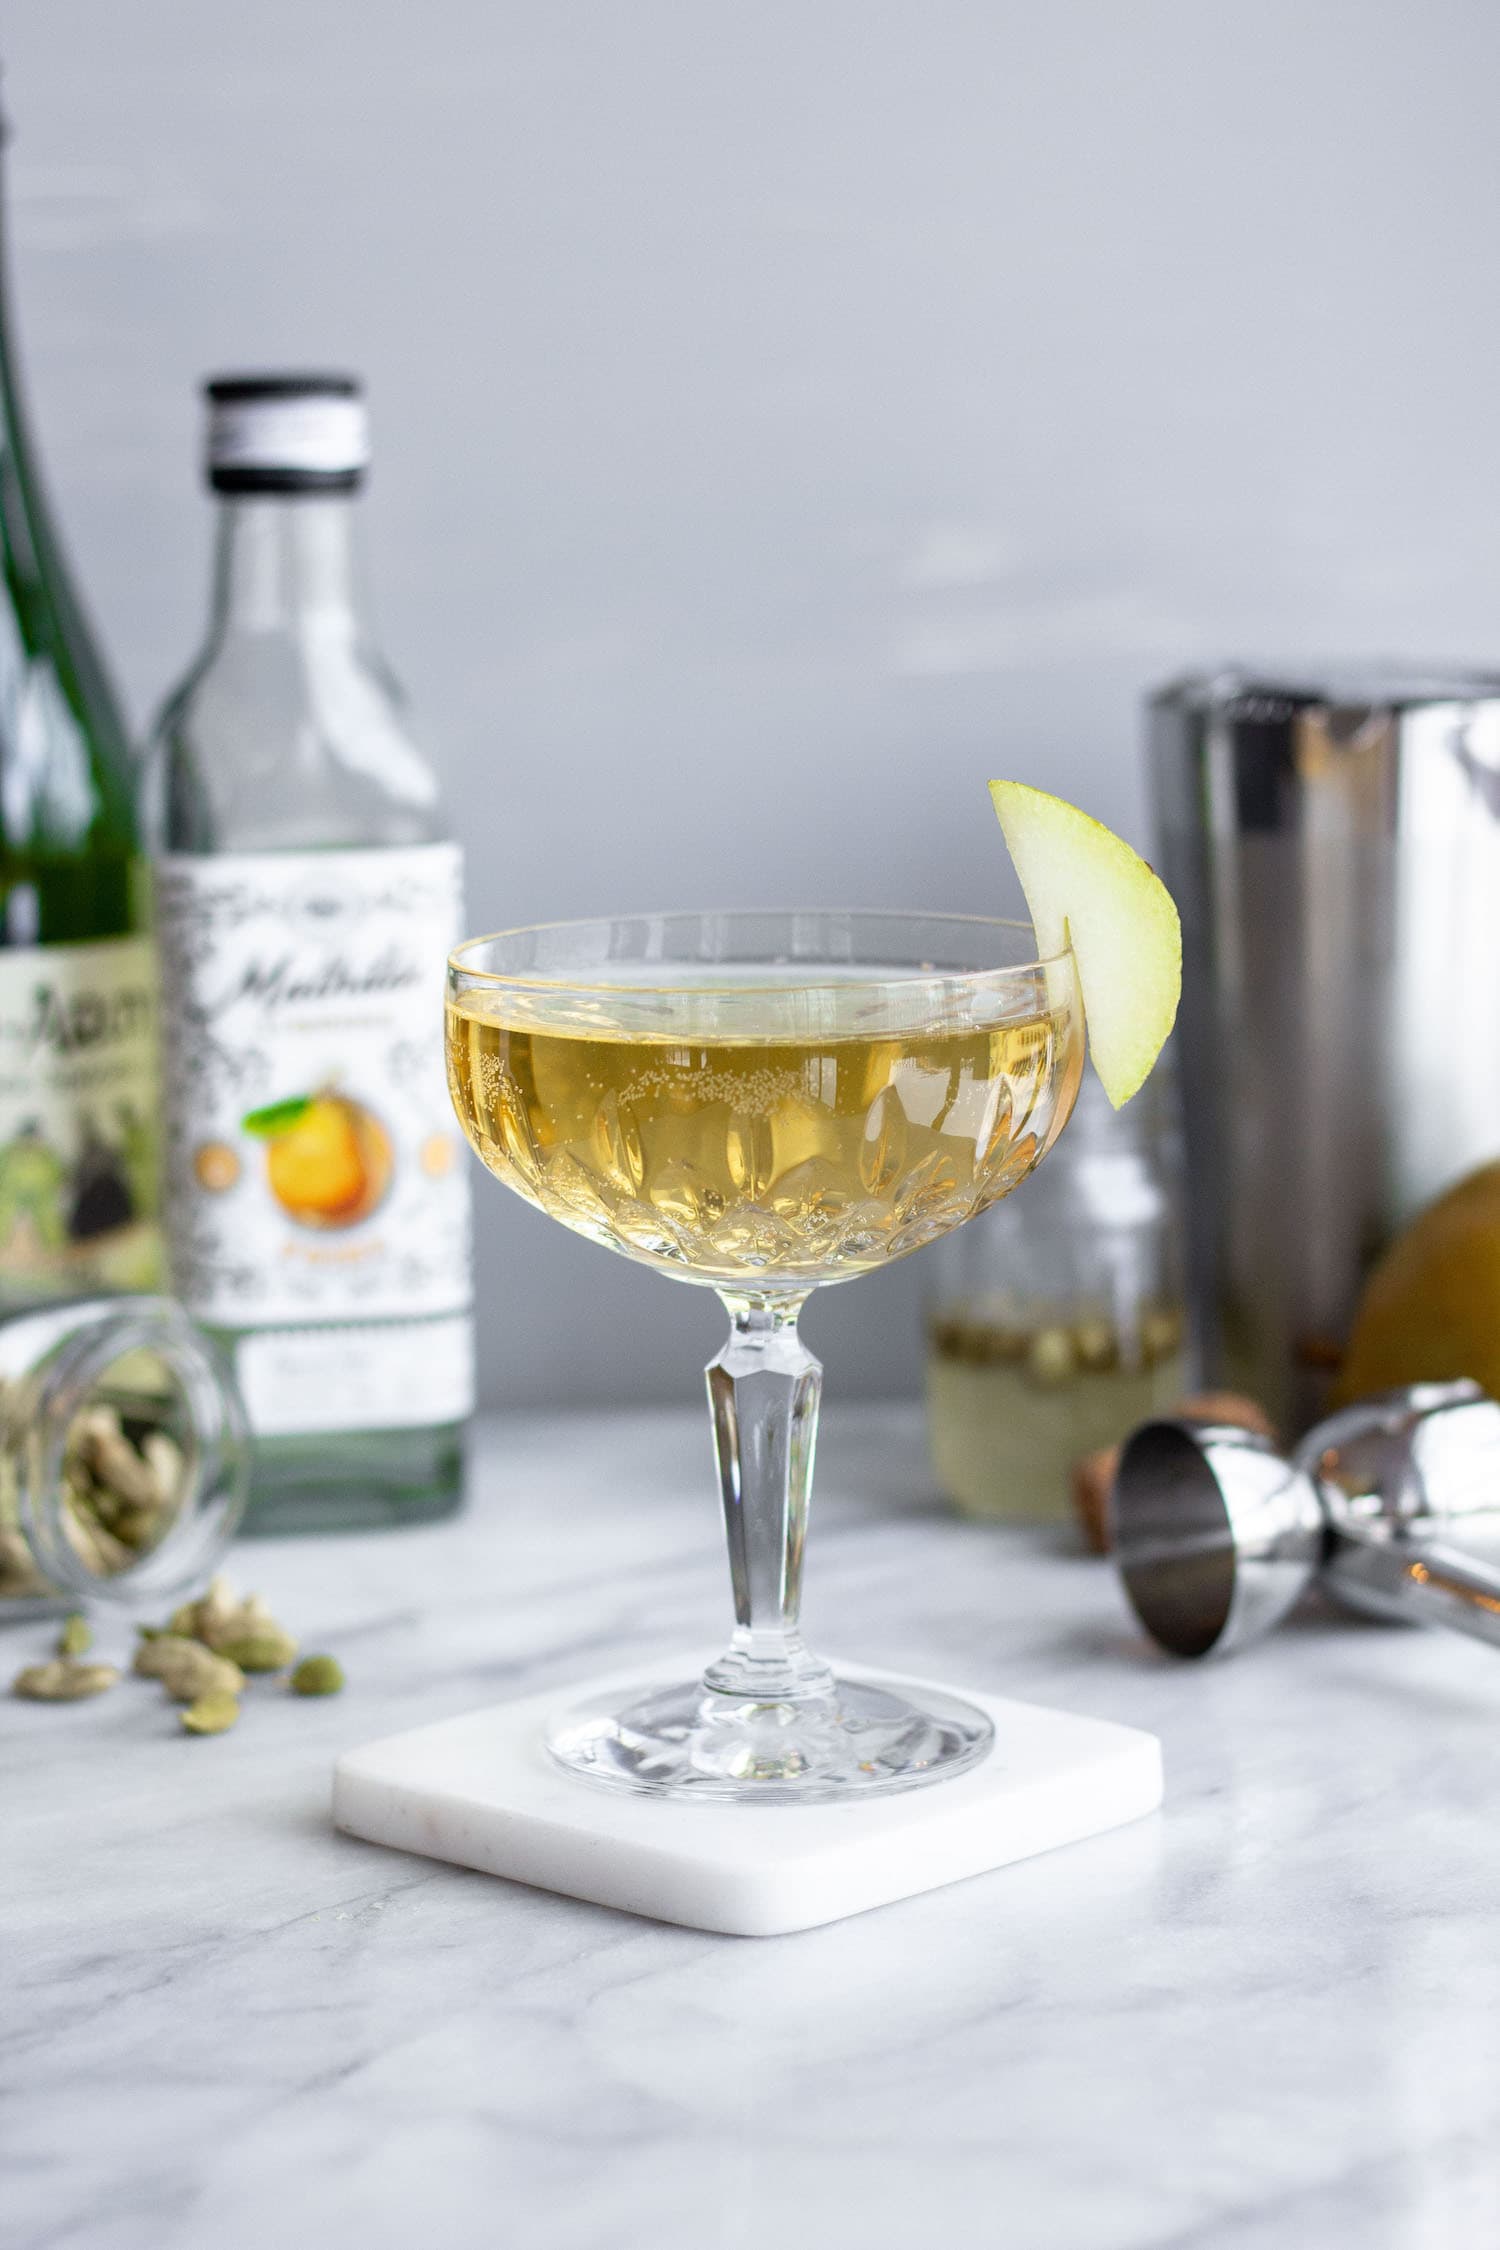 13 Thanksgiving Cocktails: Sparkling Cardamom and Pear Cocktail